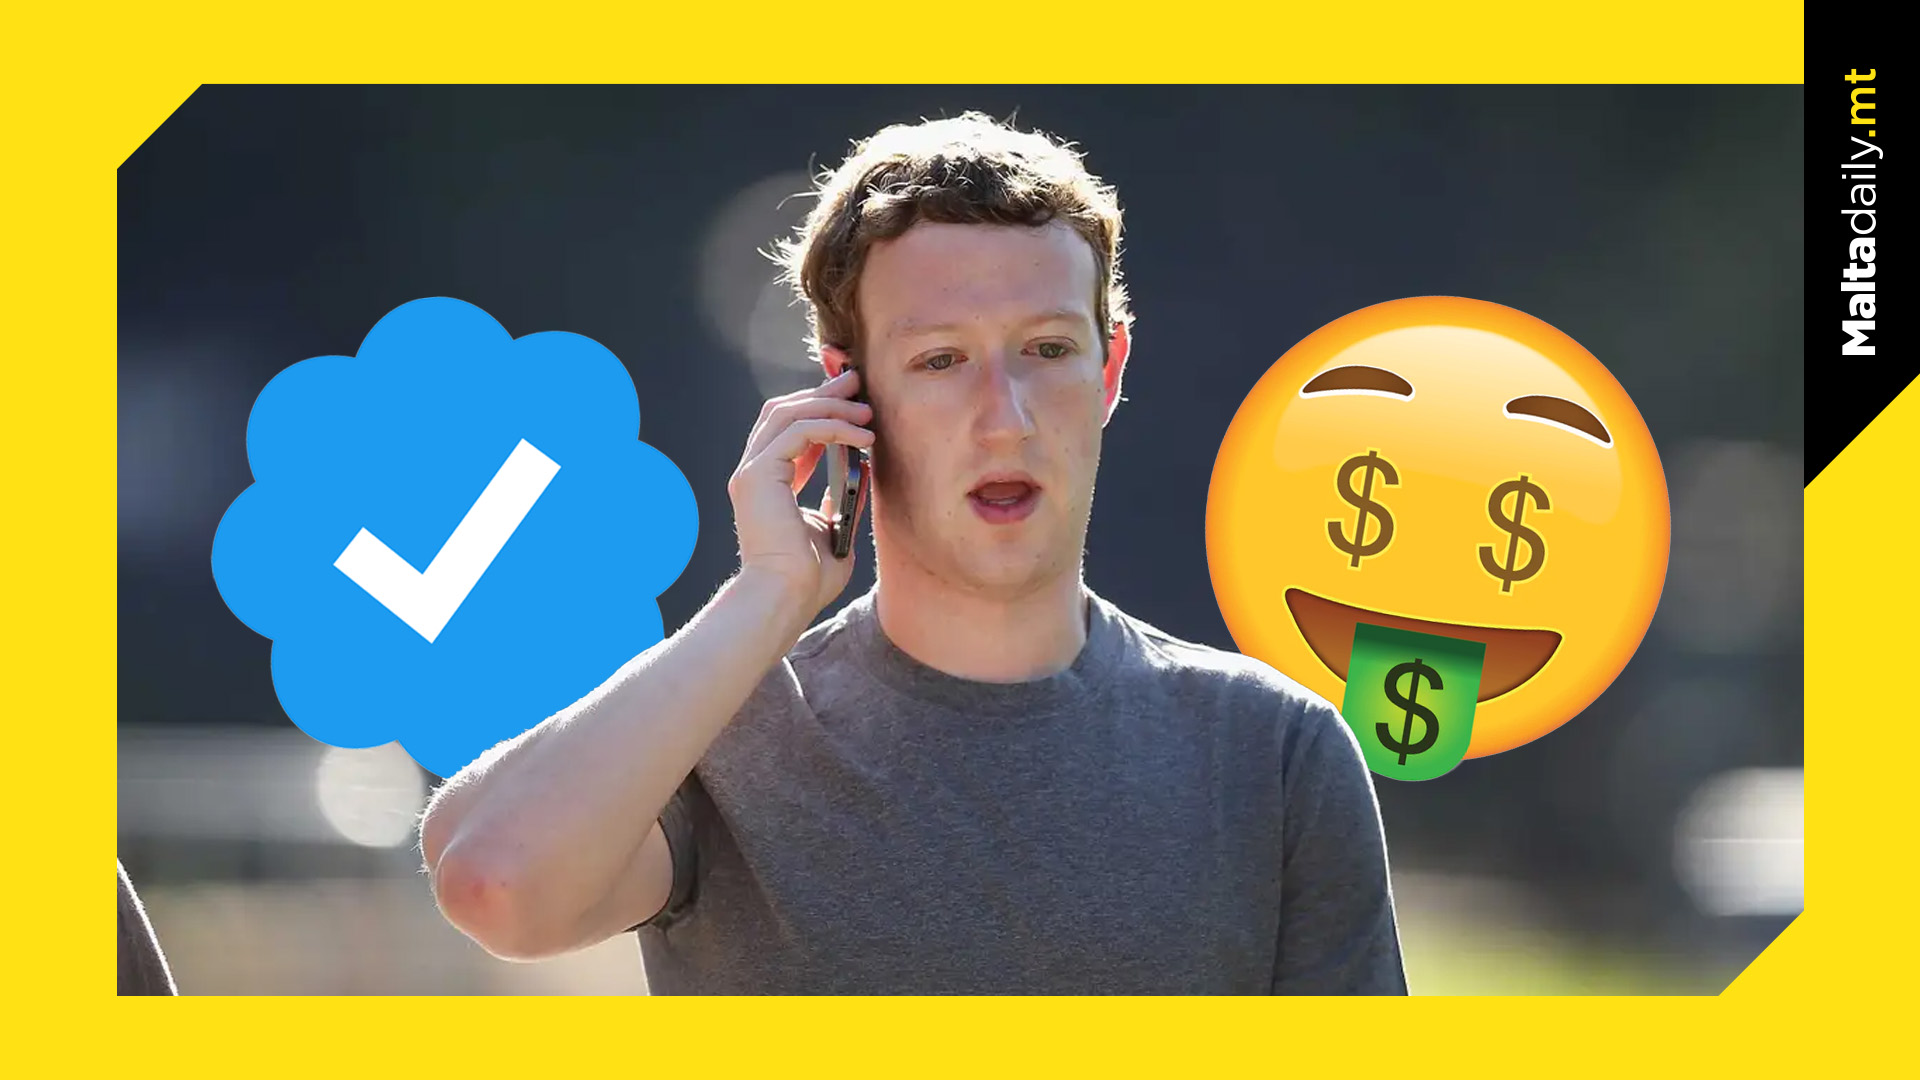 Instagram & Facebook could make $2 billion from paid verifications this year